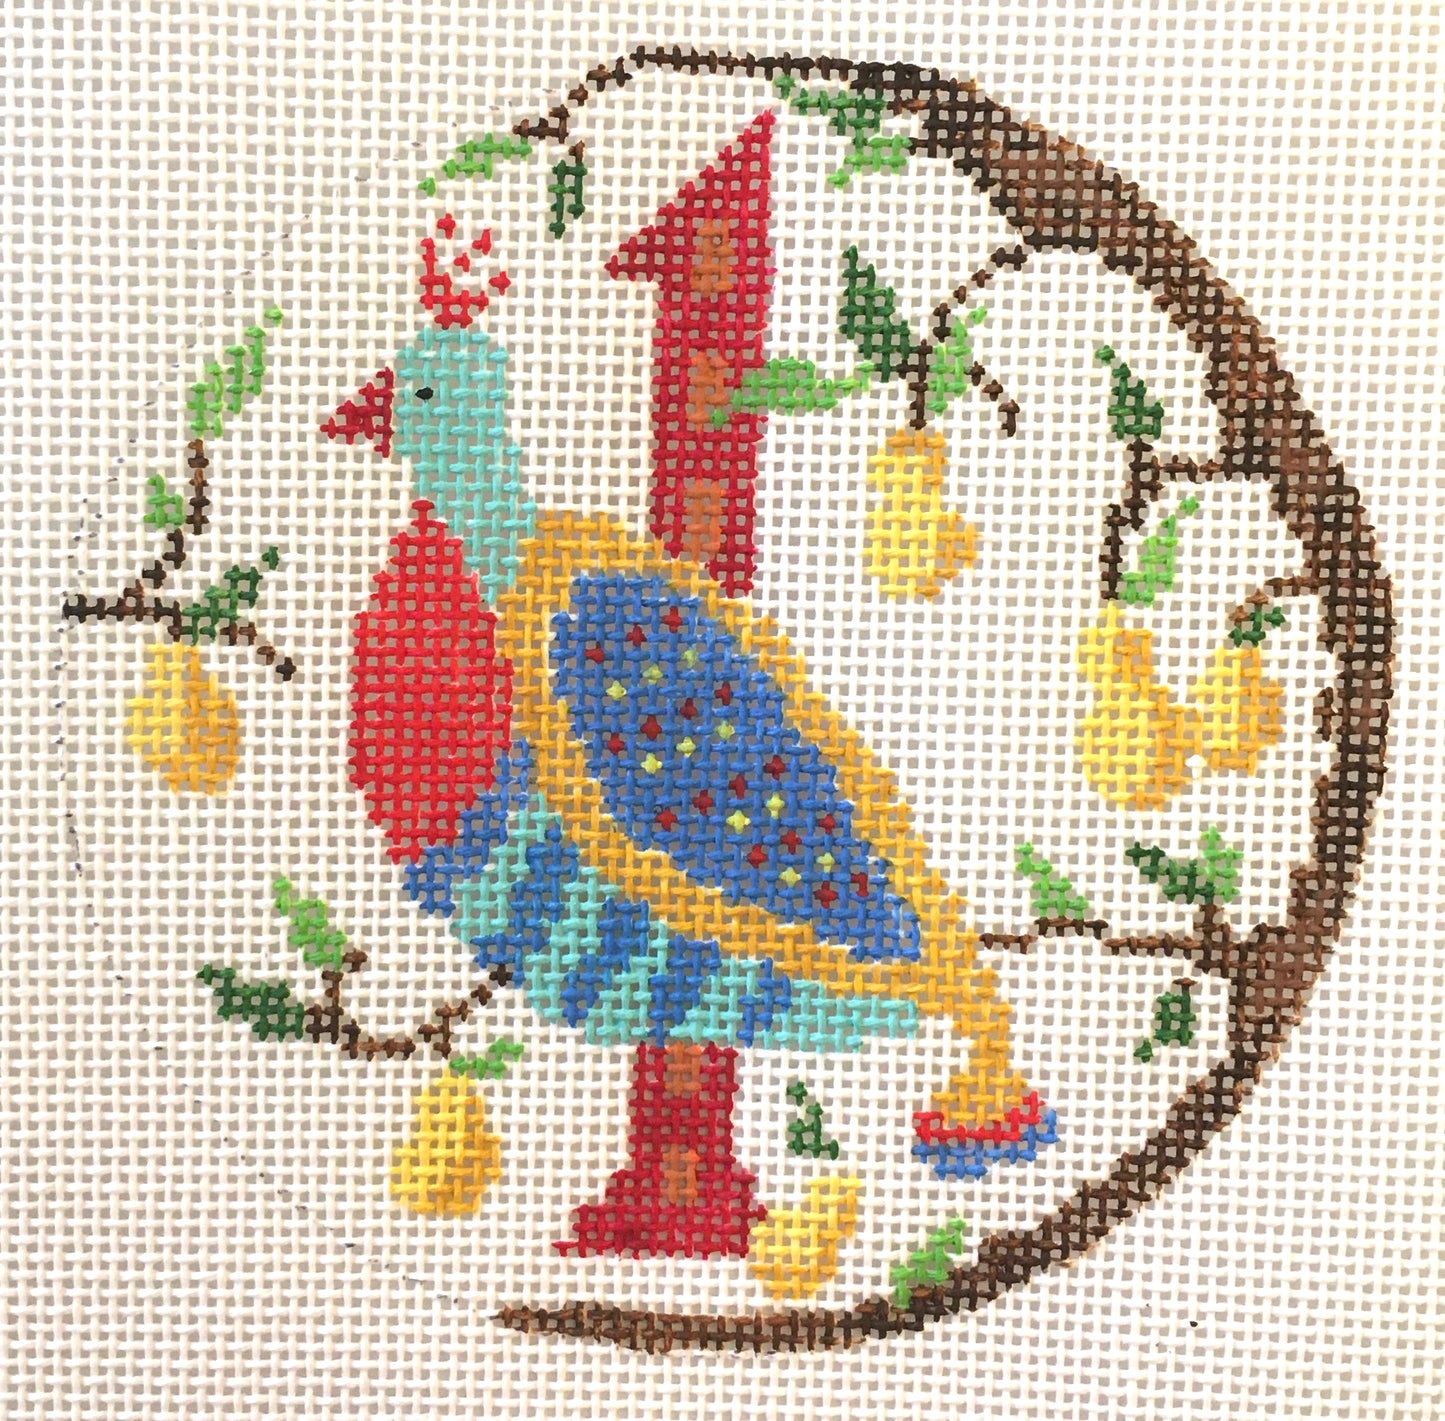 Day 1 - Partridge in a Pear Tree -  12 Days of Christmas Needlepoint Canvas Series